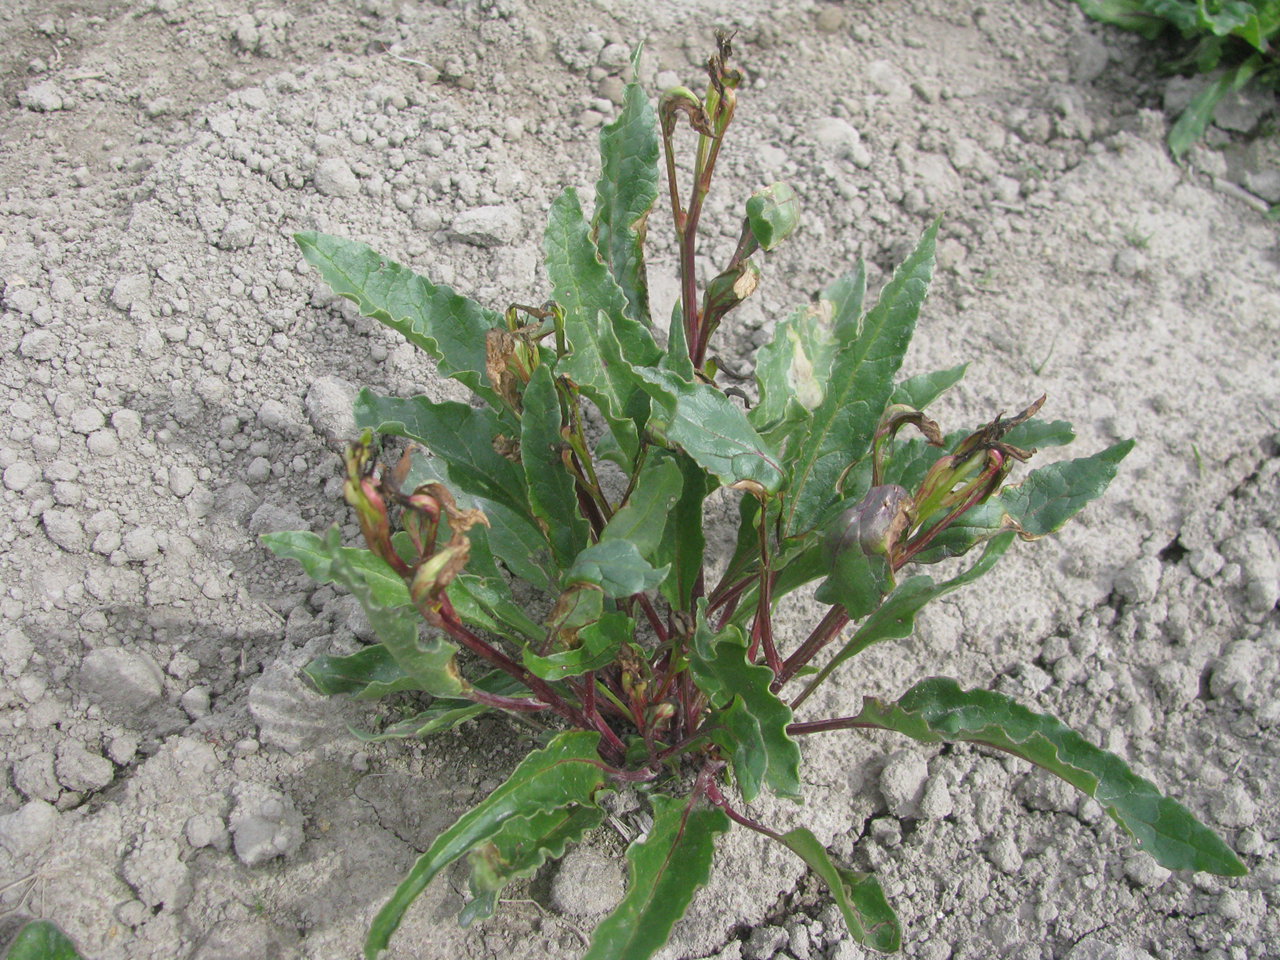 Damage to the new growth of plants in an open-pollinated table beet seed crop observed in May 2016 following application of a high rate of the herbicide Nortron (active ingredient ethofumesate).